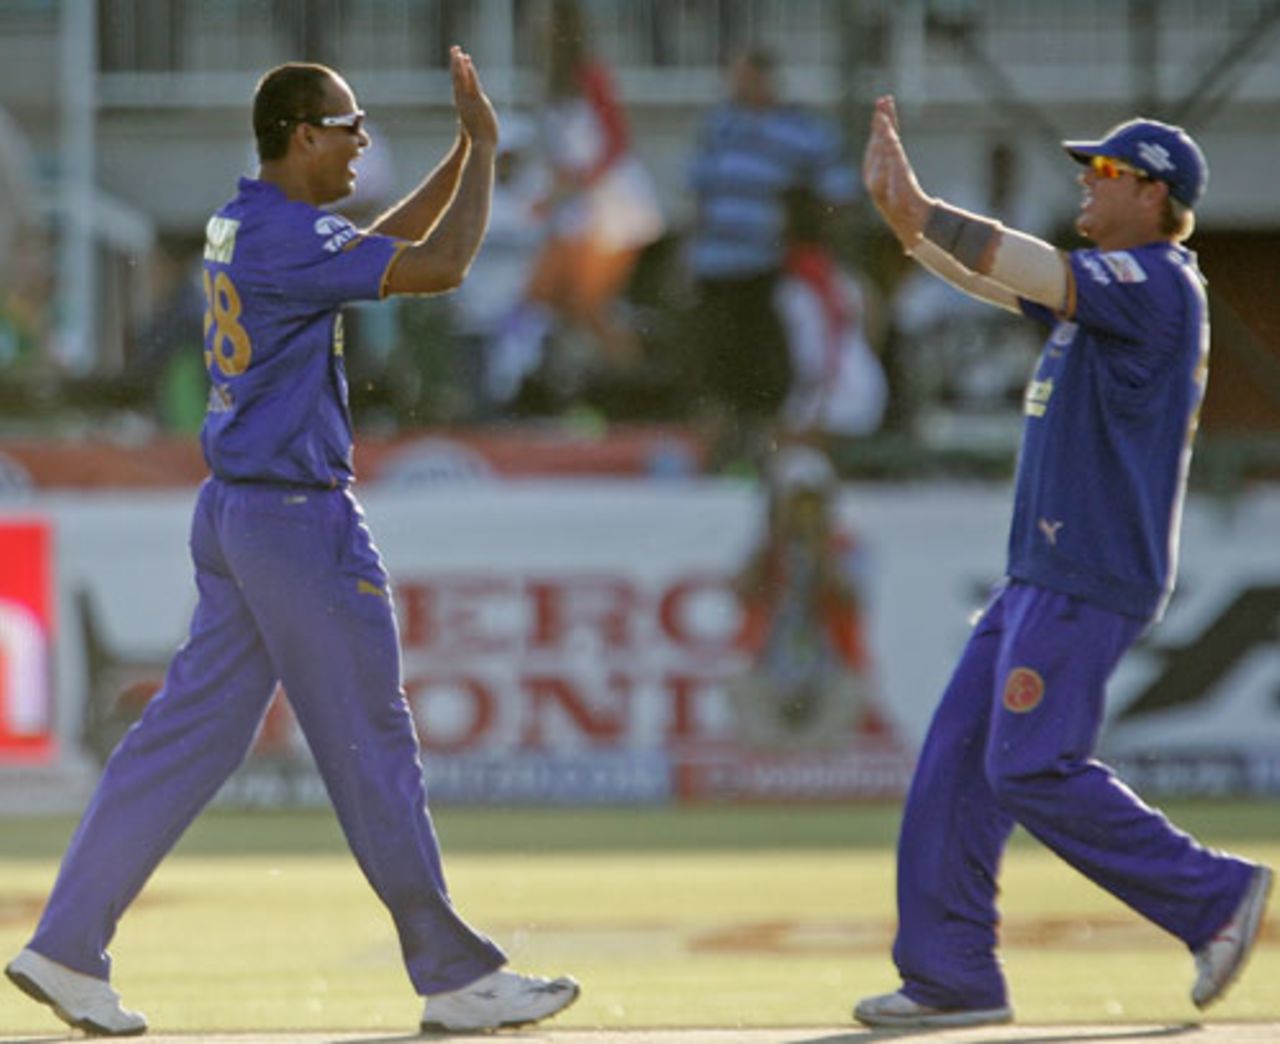 Yusuf Pathan and Shane Warne celebrate dismissing Adam Gilchrist, Deccan Chargers v Rajasthan Royals, IPL, 40th match, Kimberley, May 11, 2009